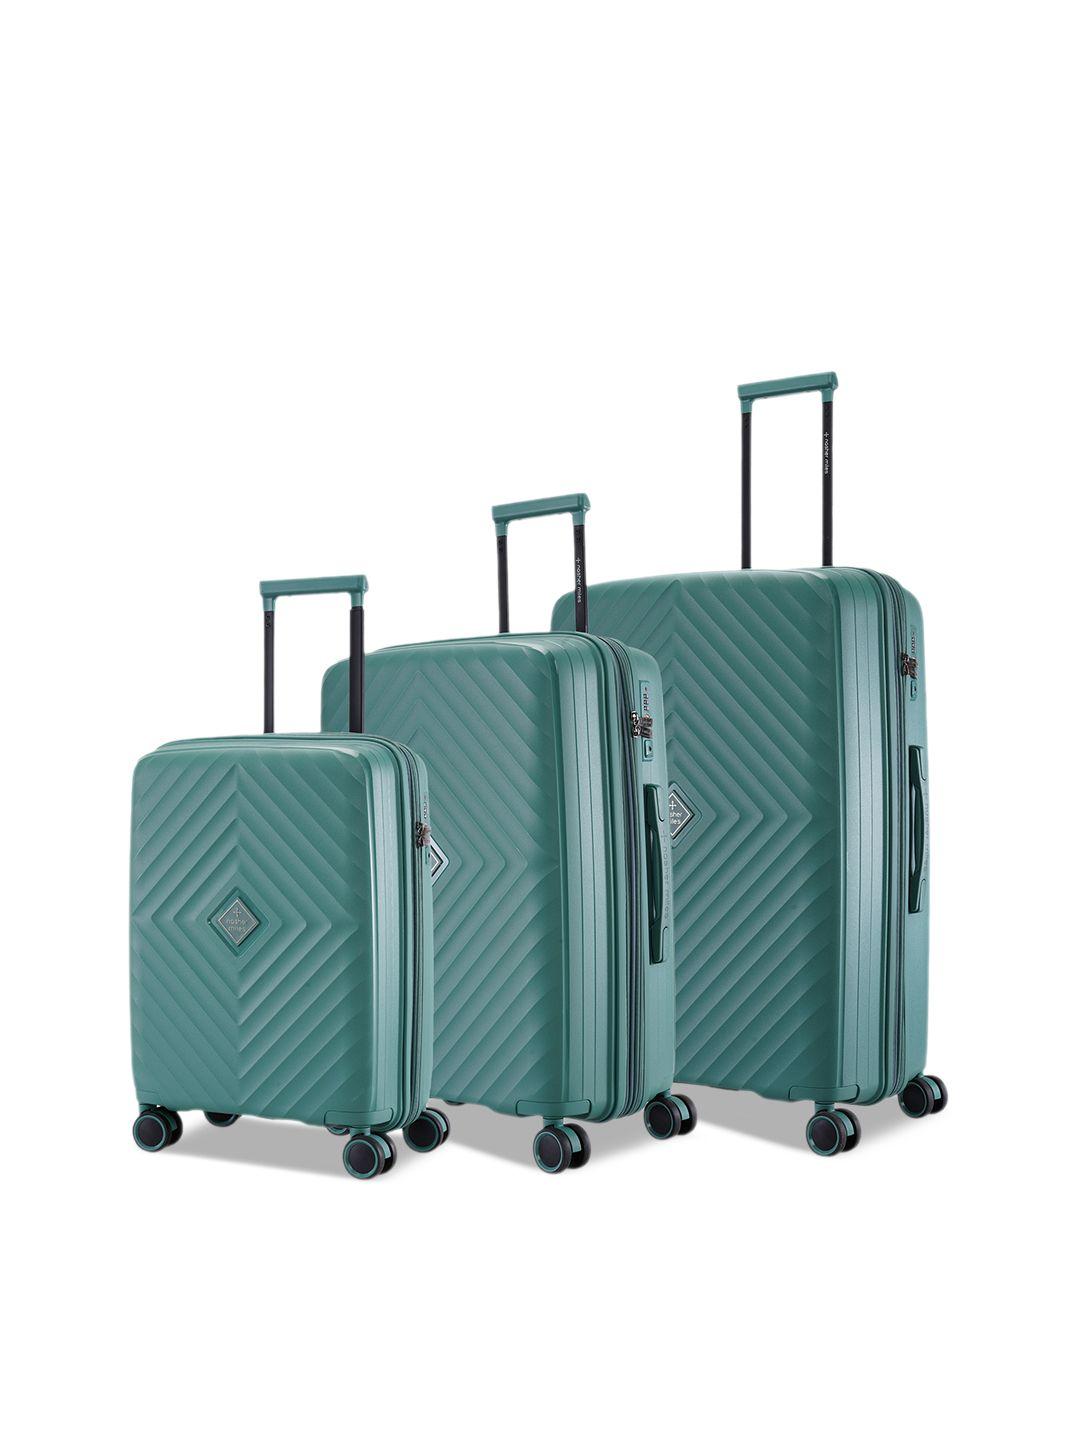 nasher-miles-set-of-3-hard-sided-textured-trolley-suitcases